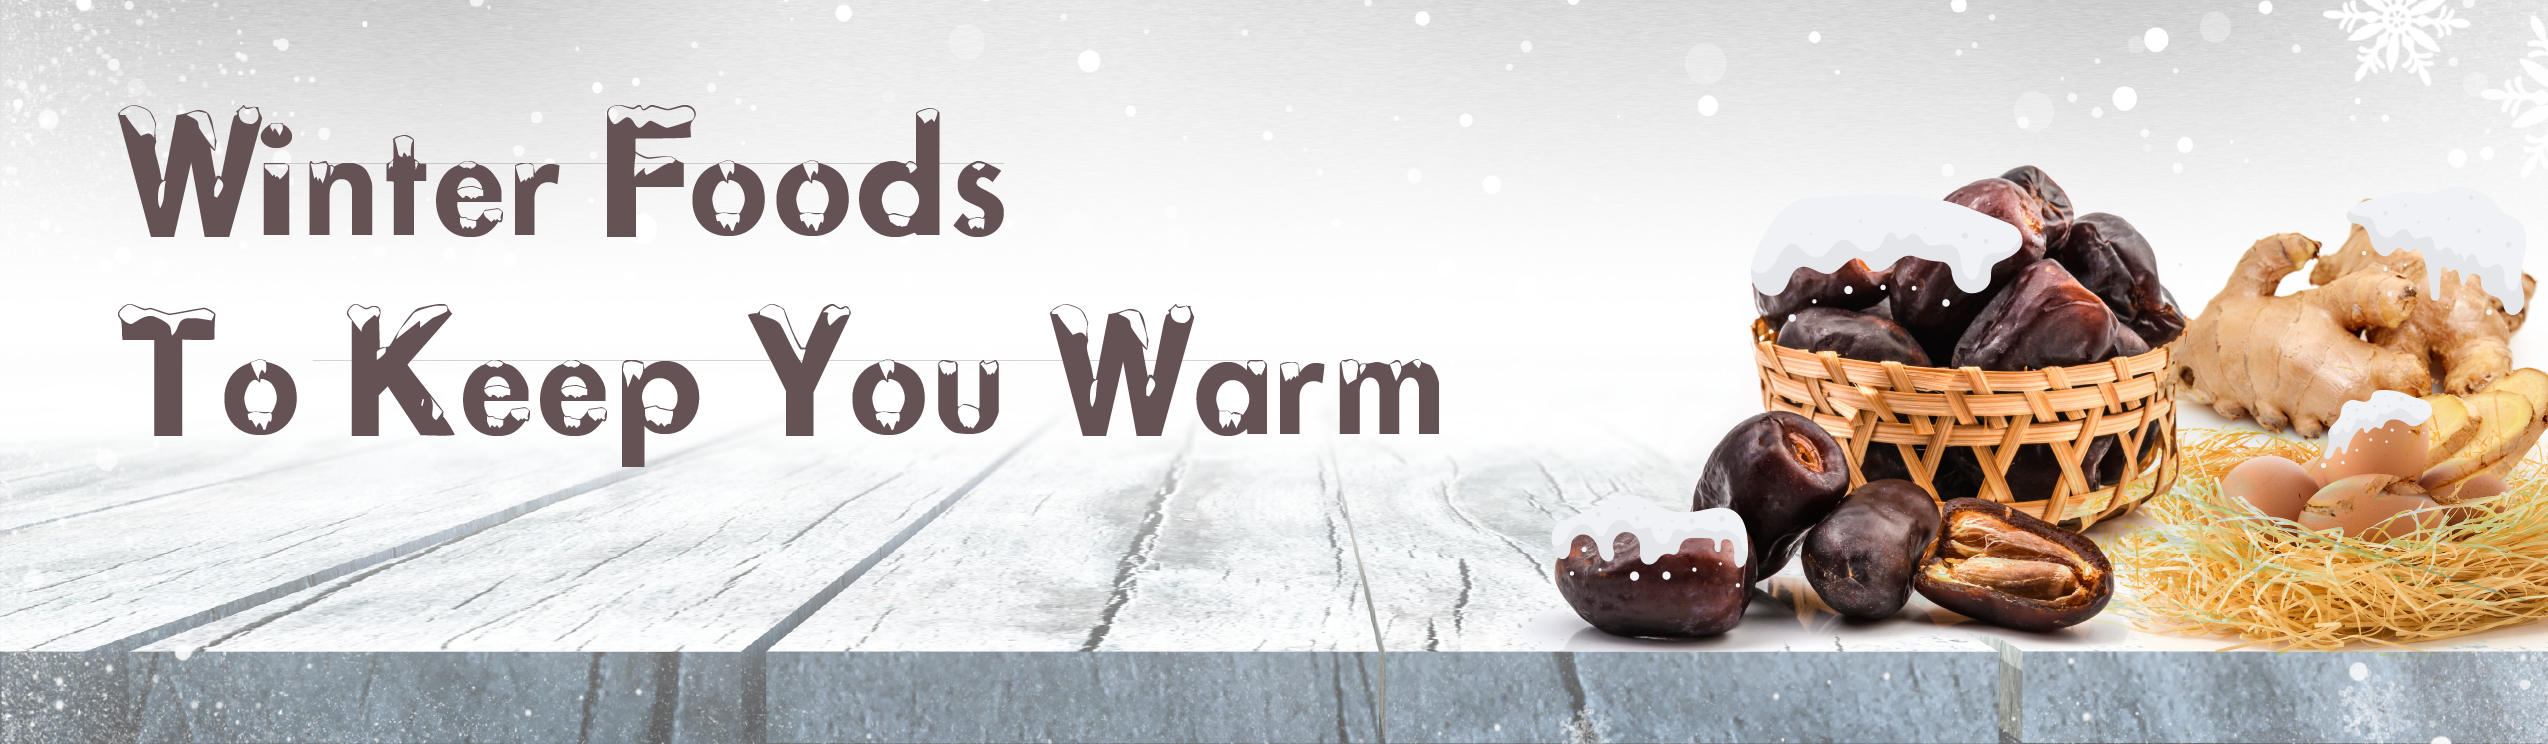 Winter Foods to Keep You Warm